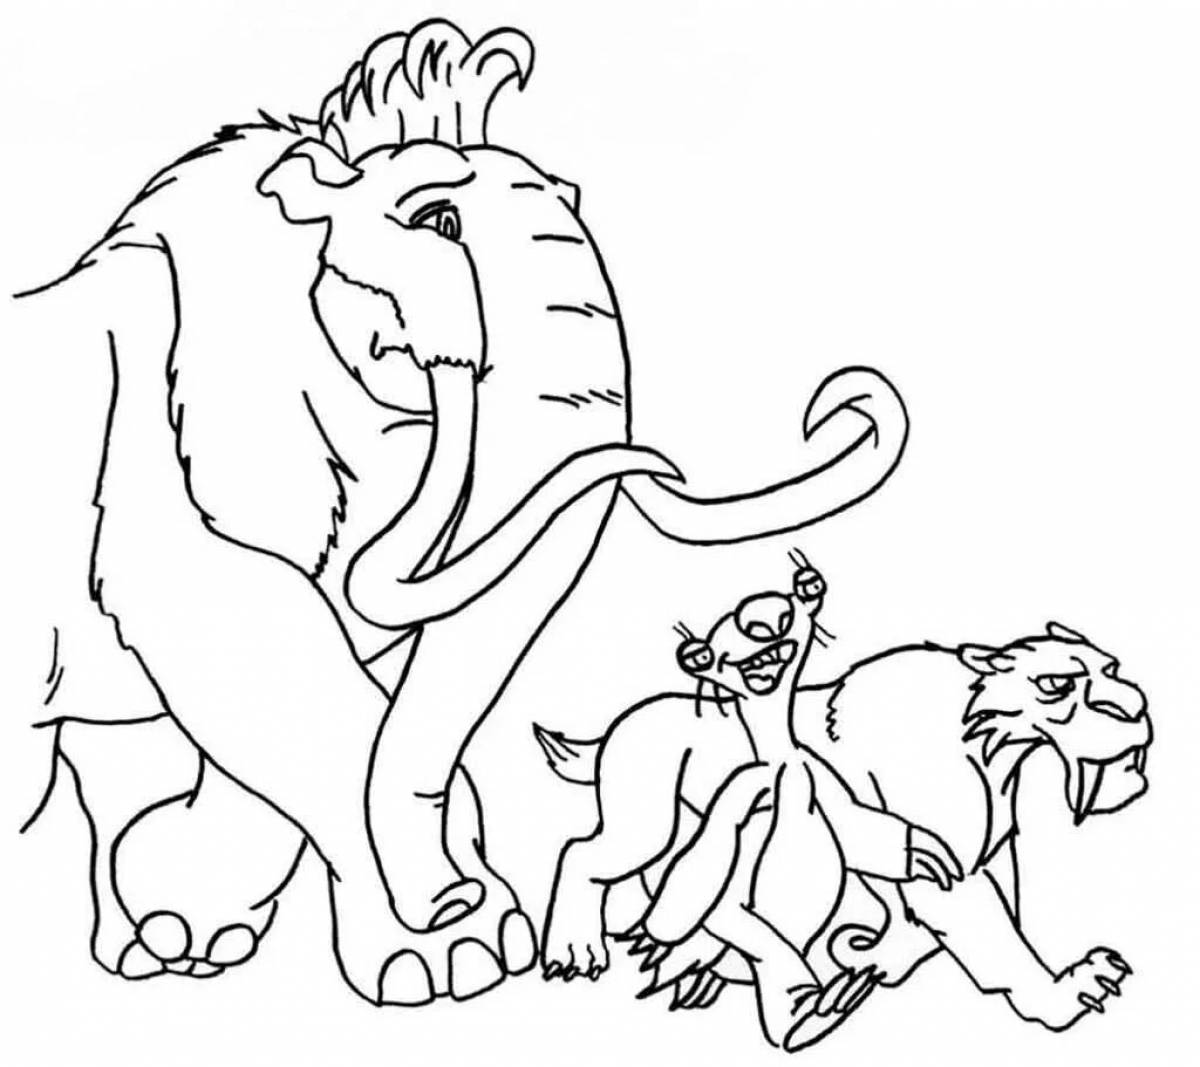 Dynamic ice age 4 coloring page